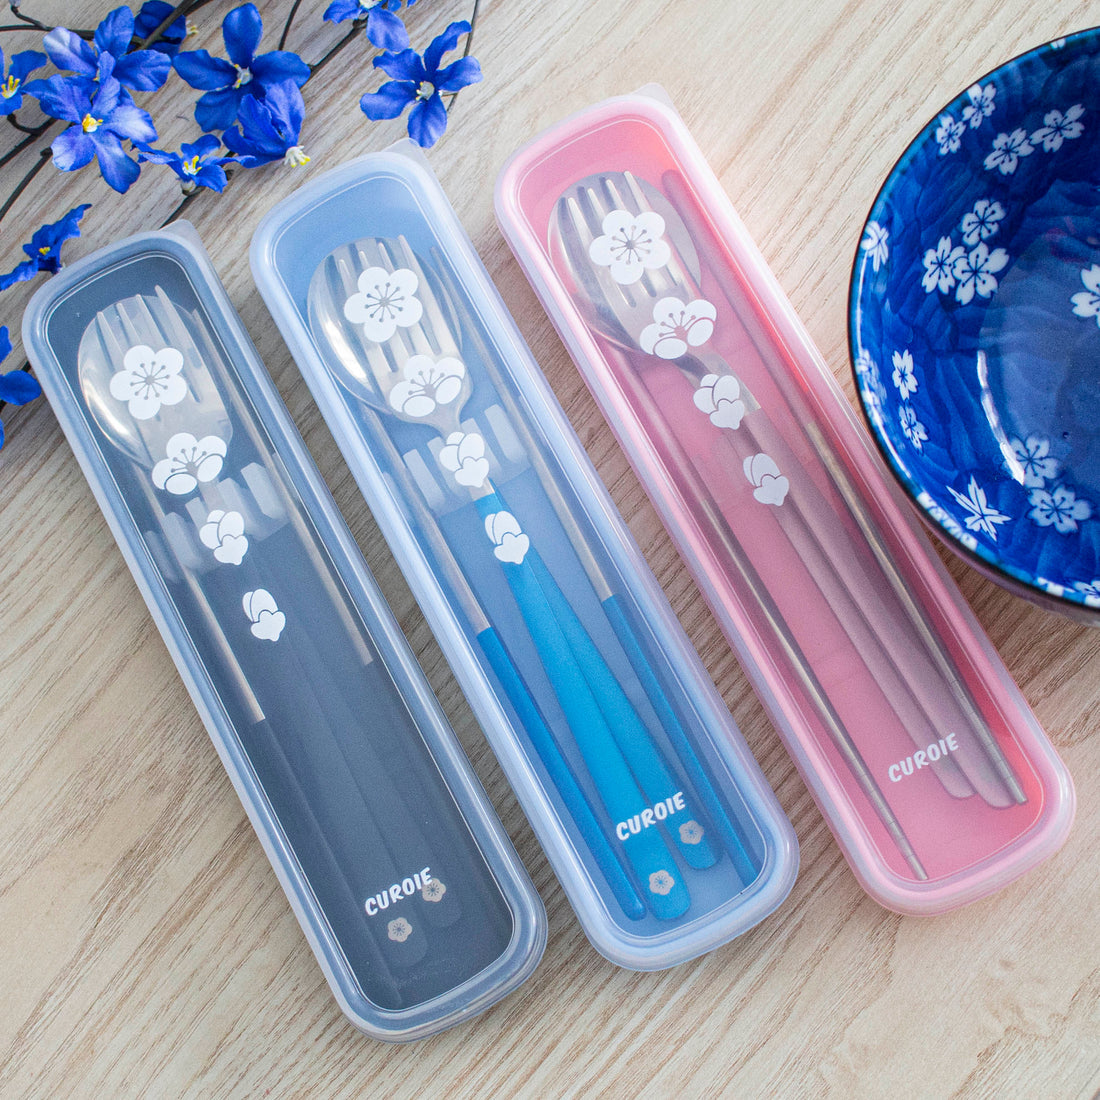 [CUROIE] Blossom V2 Stainless Steel Utencil Set